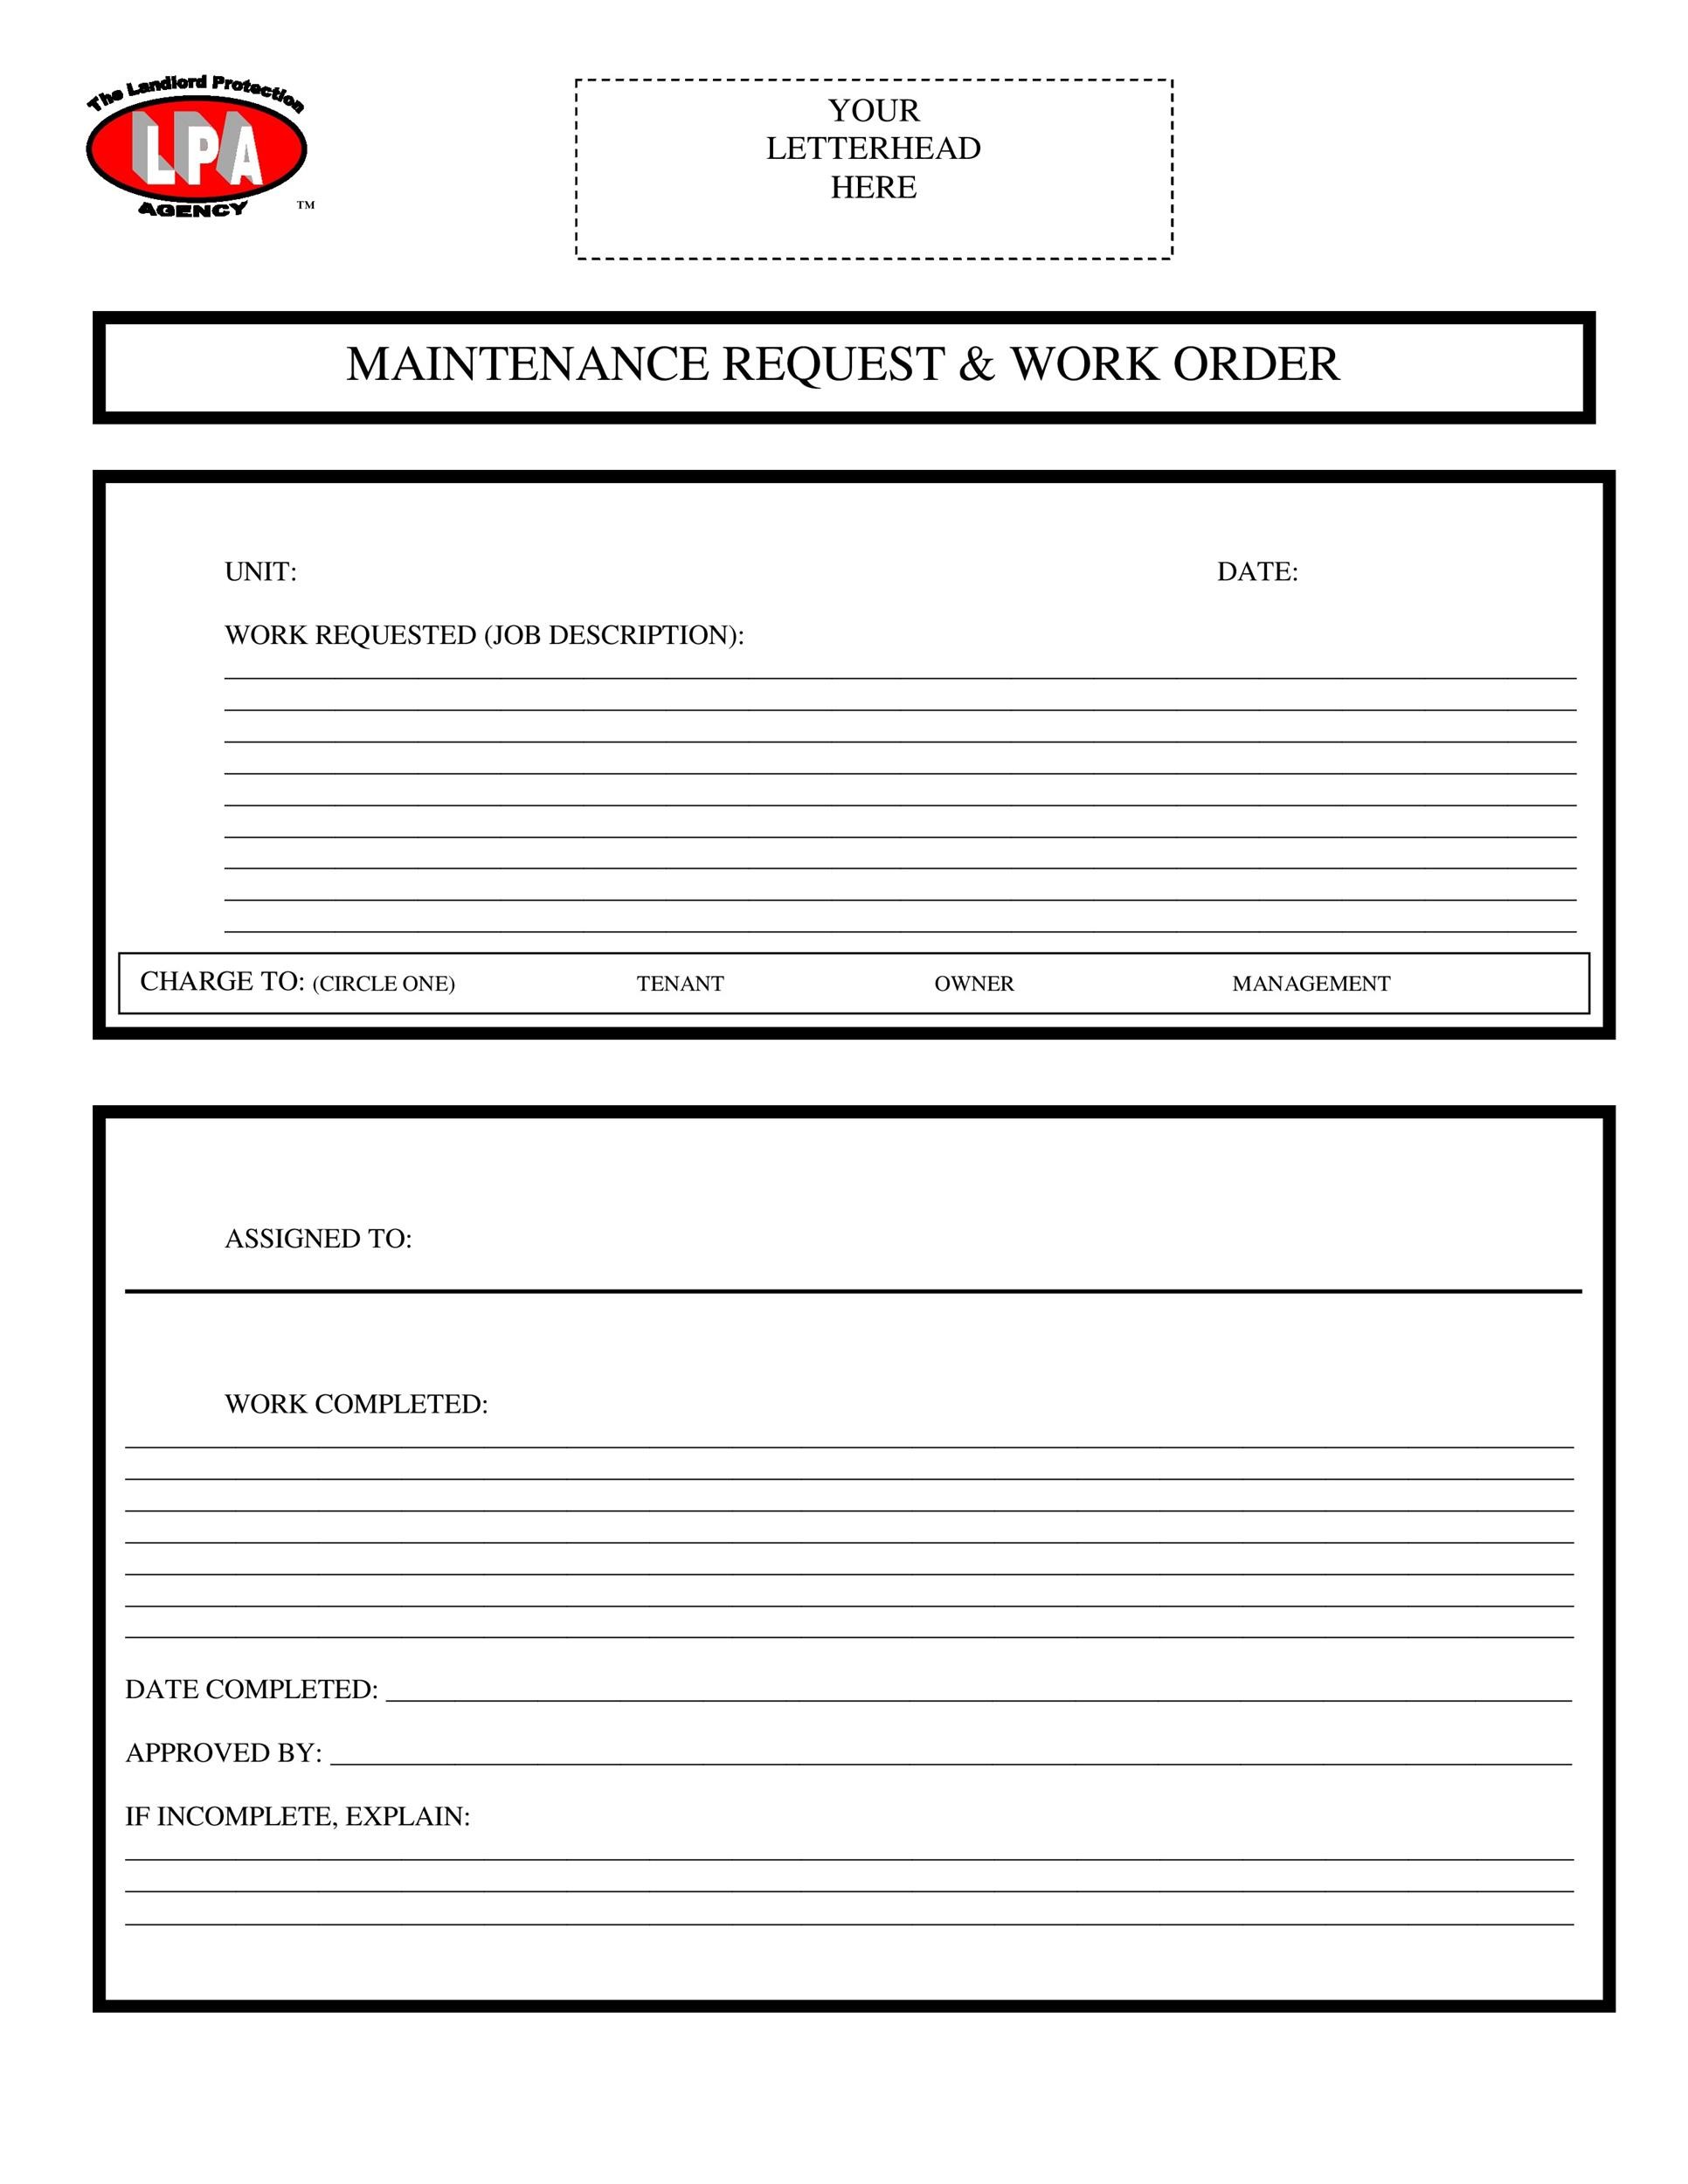 Work Order Form Template Free from templatelab.com